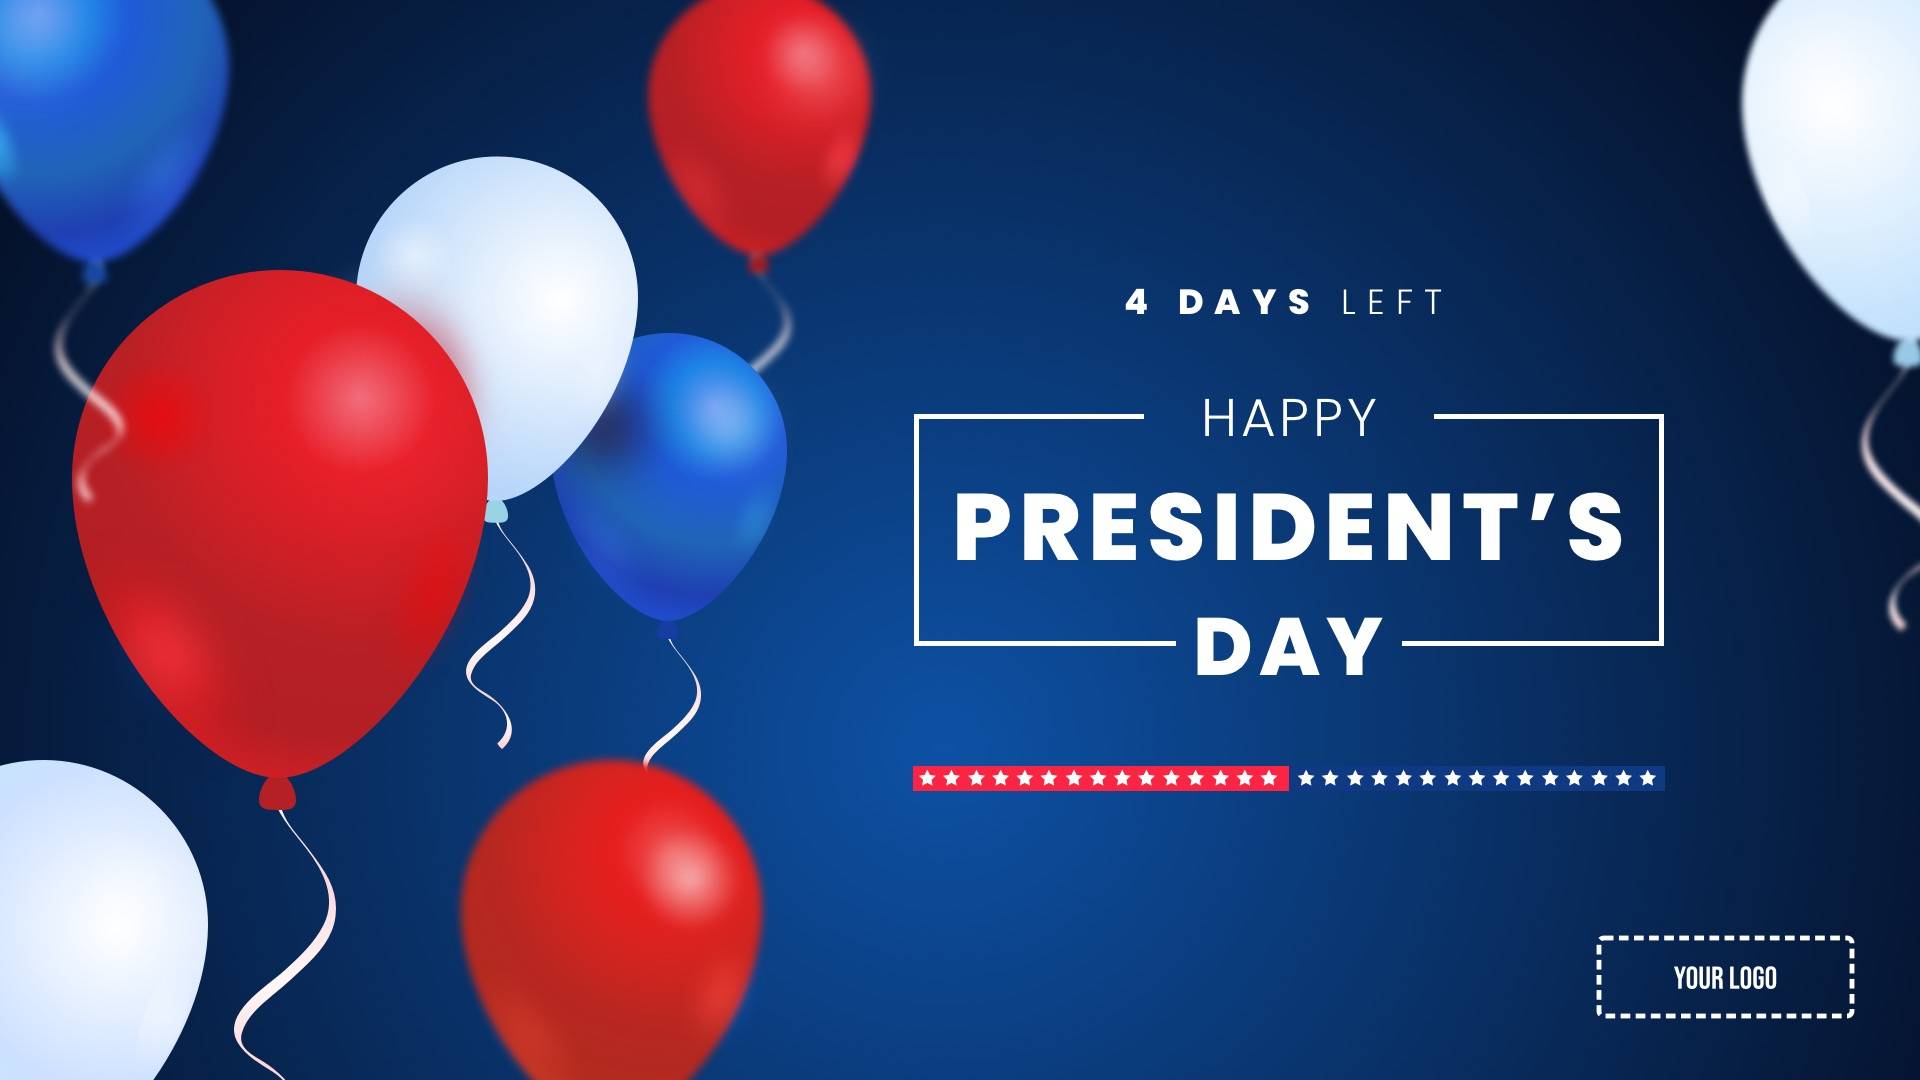 President's Day Digital Signage Template